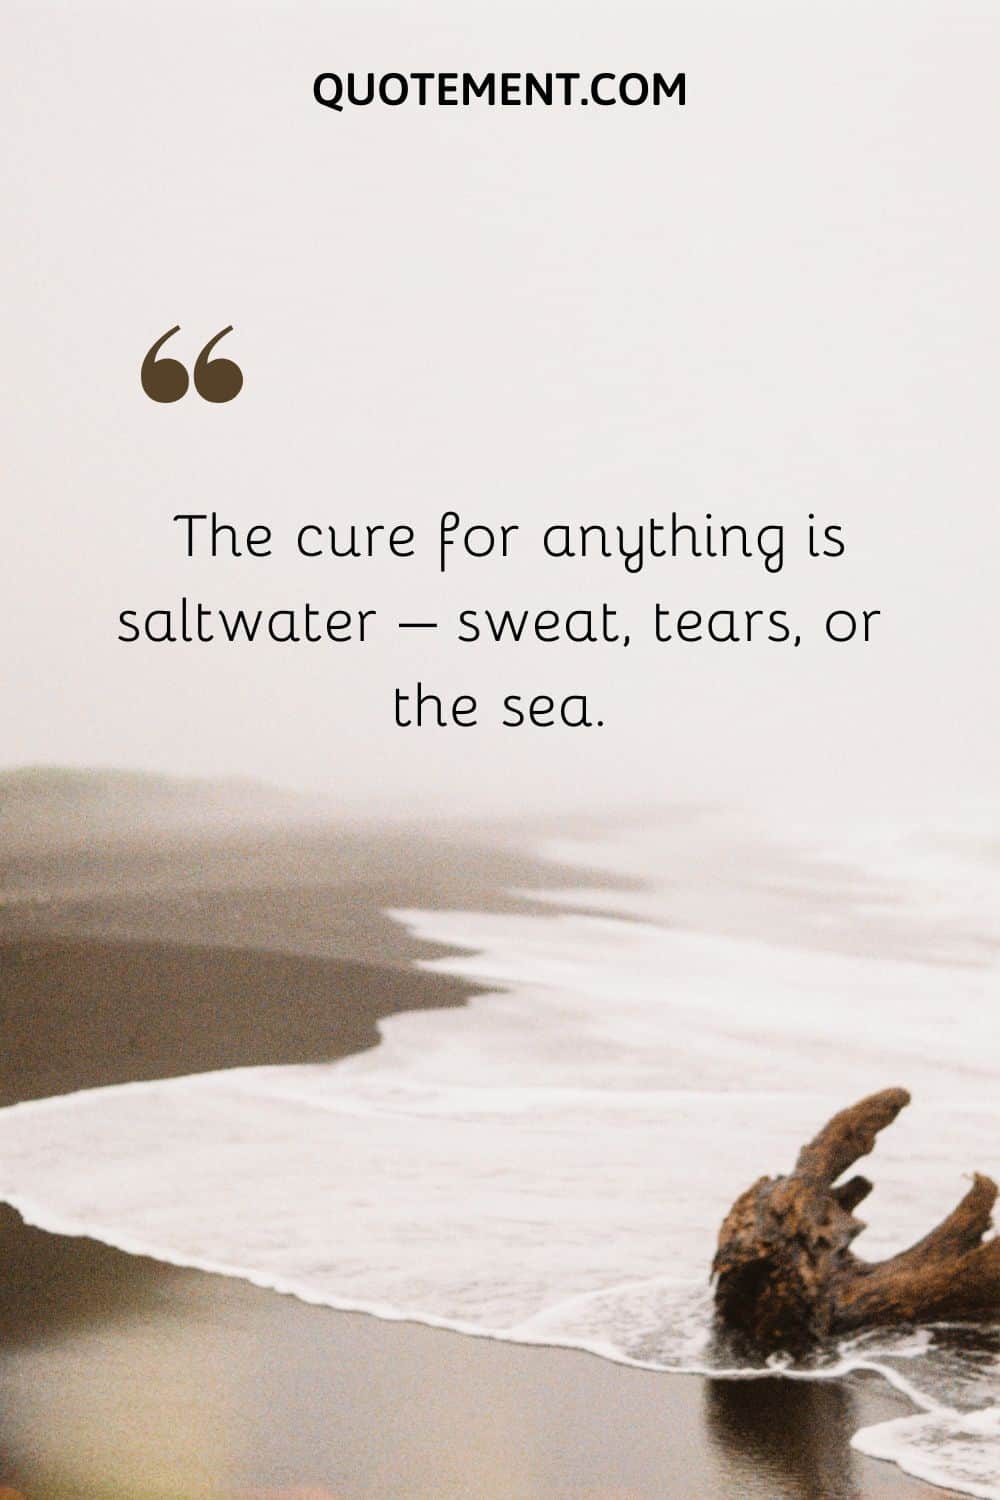 The cure for anything is saltwater – sweat, tears, or the sea.